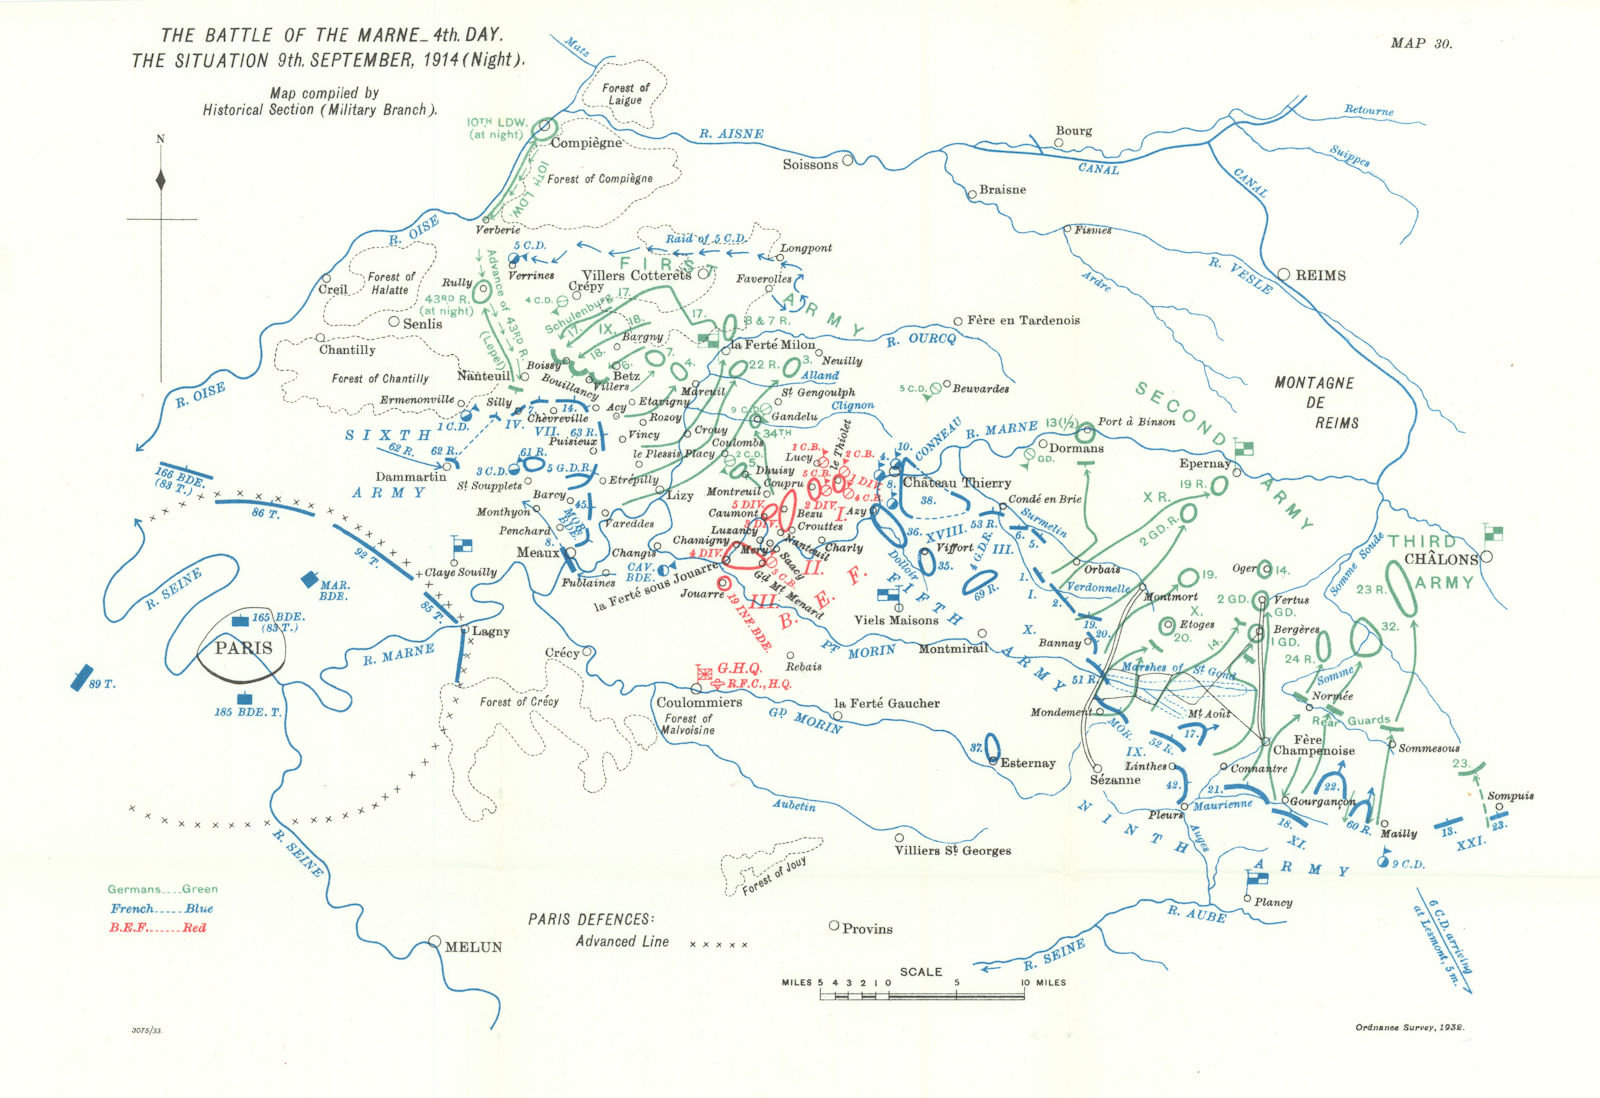 Battle of the Marne. Situation 9th September, 1914 night. WW1. 1933 old map